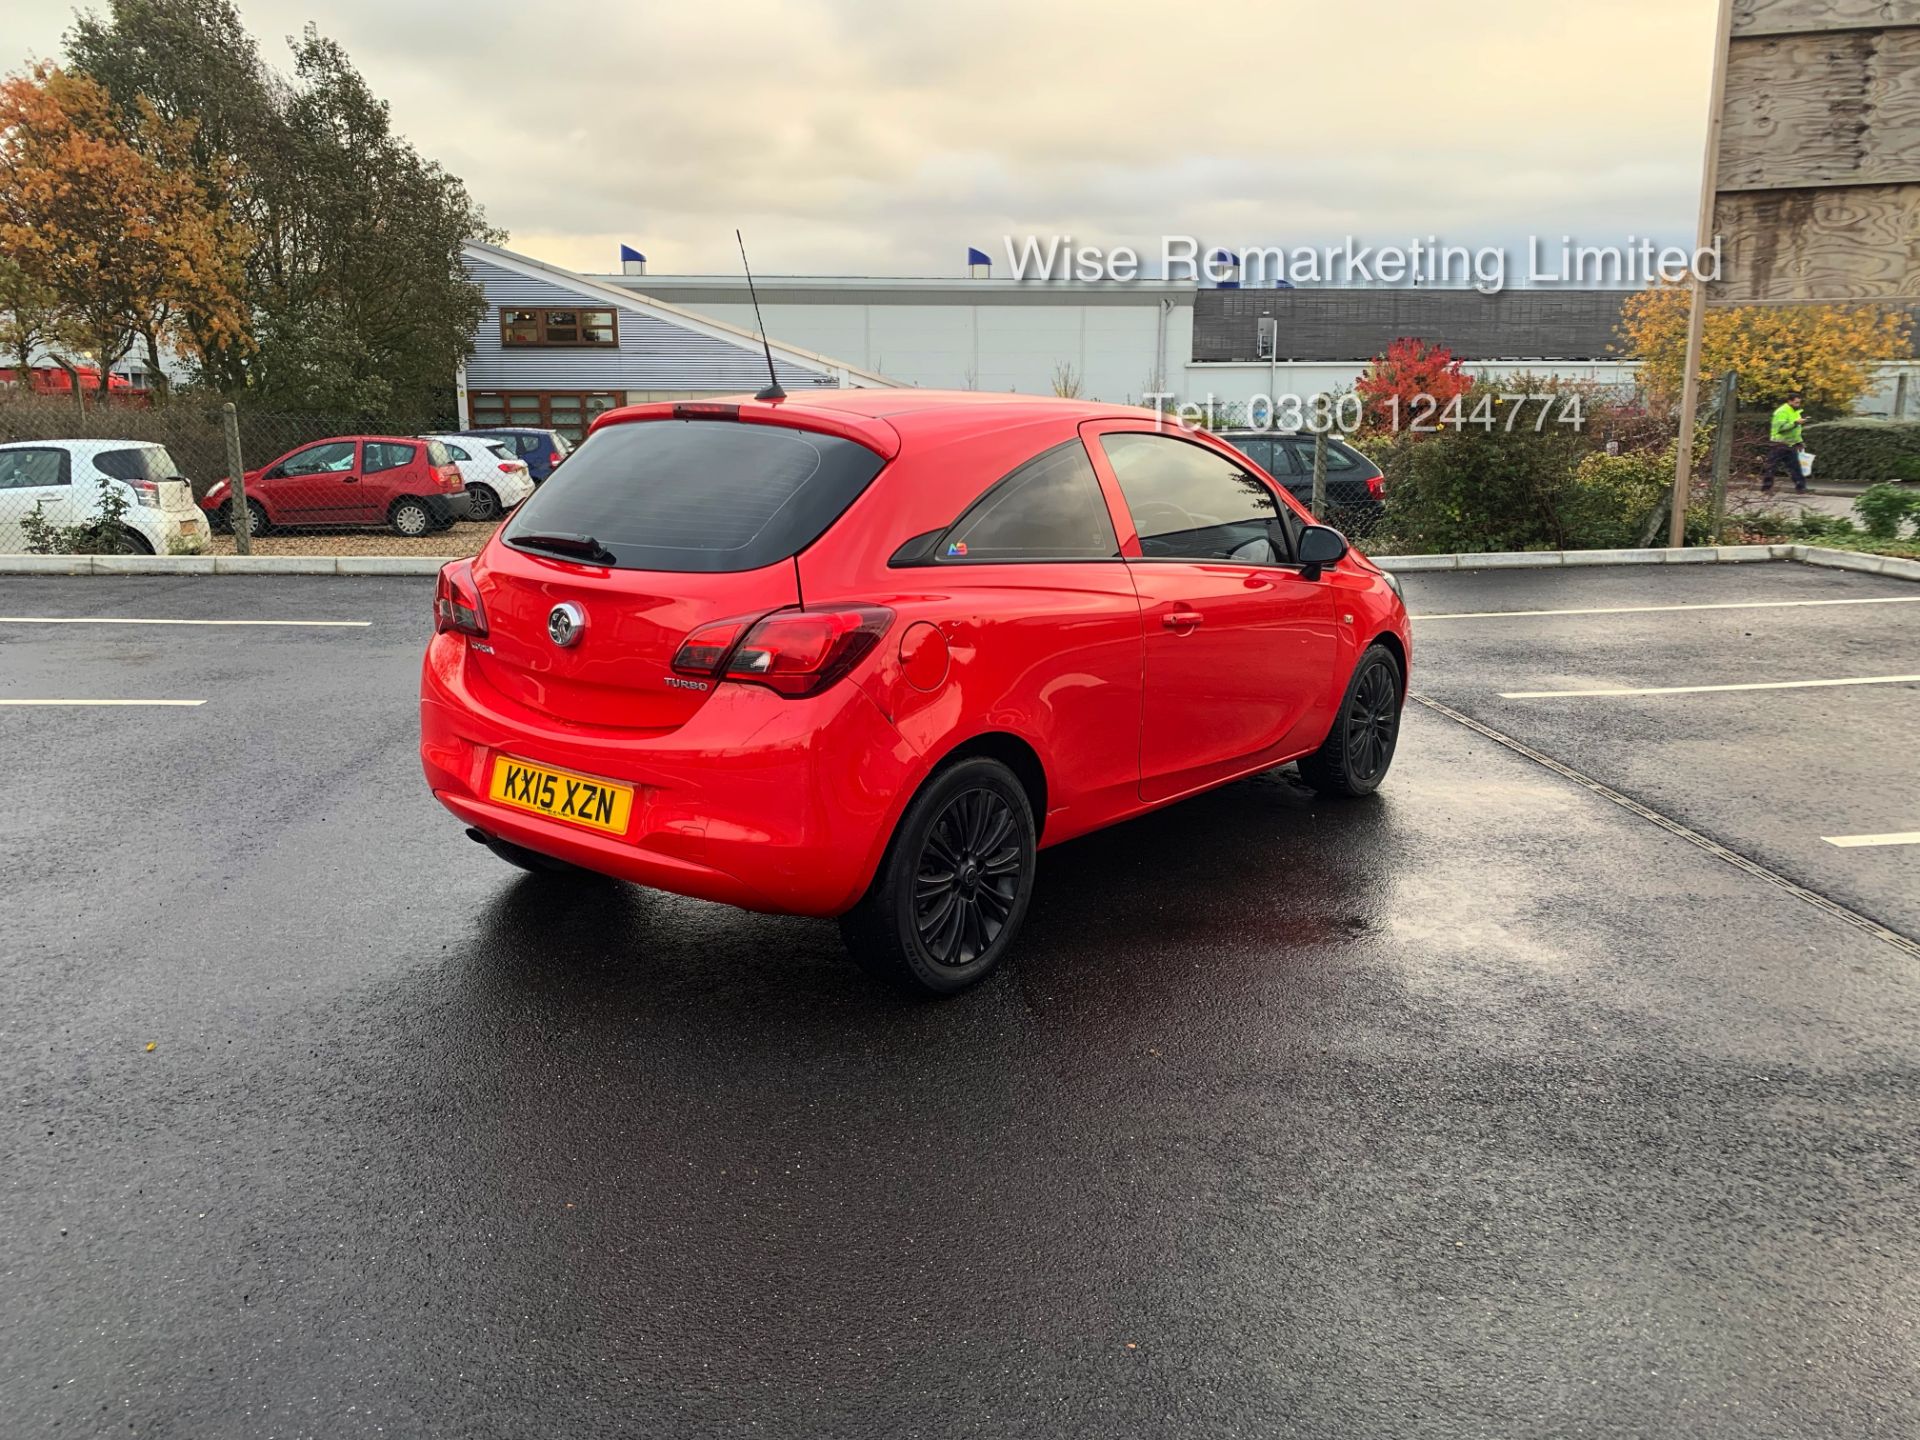 Vauxhall Corsa 1.4 Turbo Excite AC Ecoflex - 2015 15 Reg - Heated Seats - Touch Screen **TOP SPEC** - Image 5 of 22